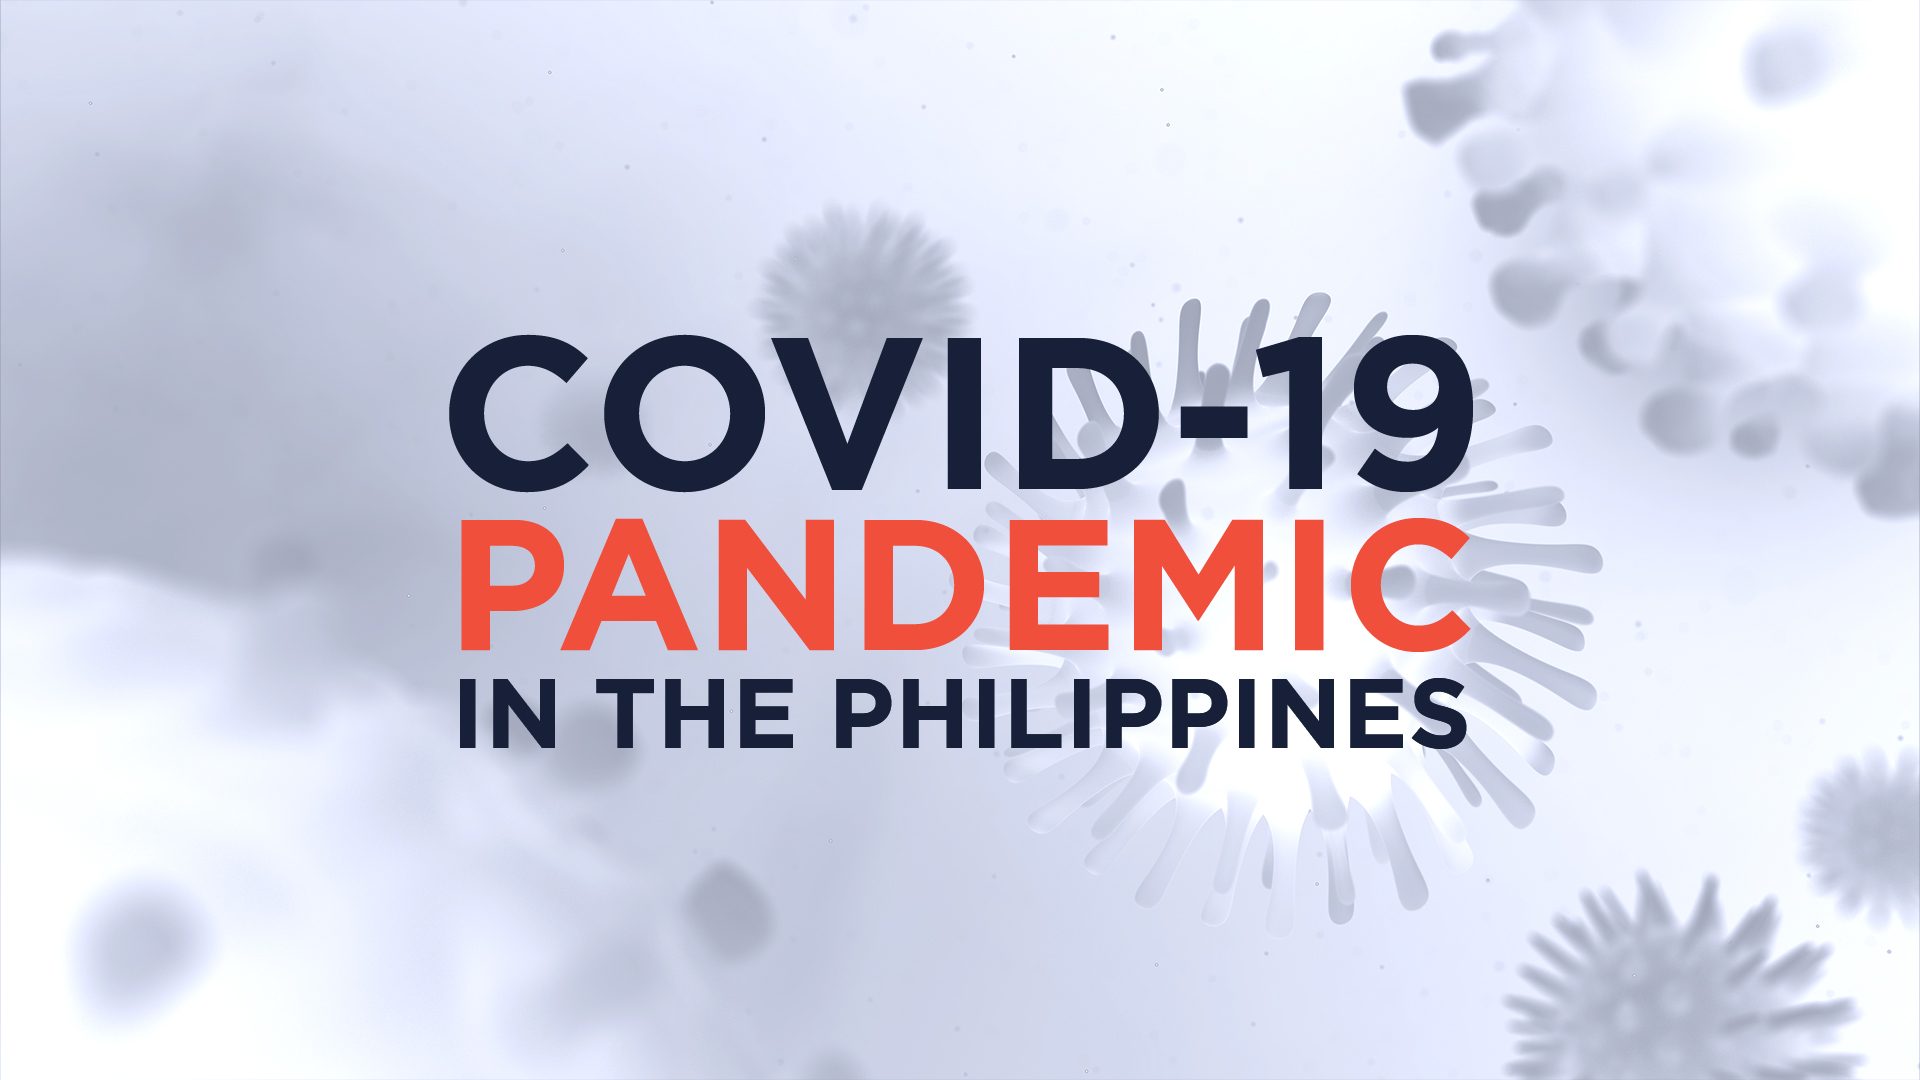 COVID-19 pandemic: Latest situation in the Philippines – February 2022